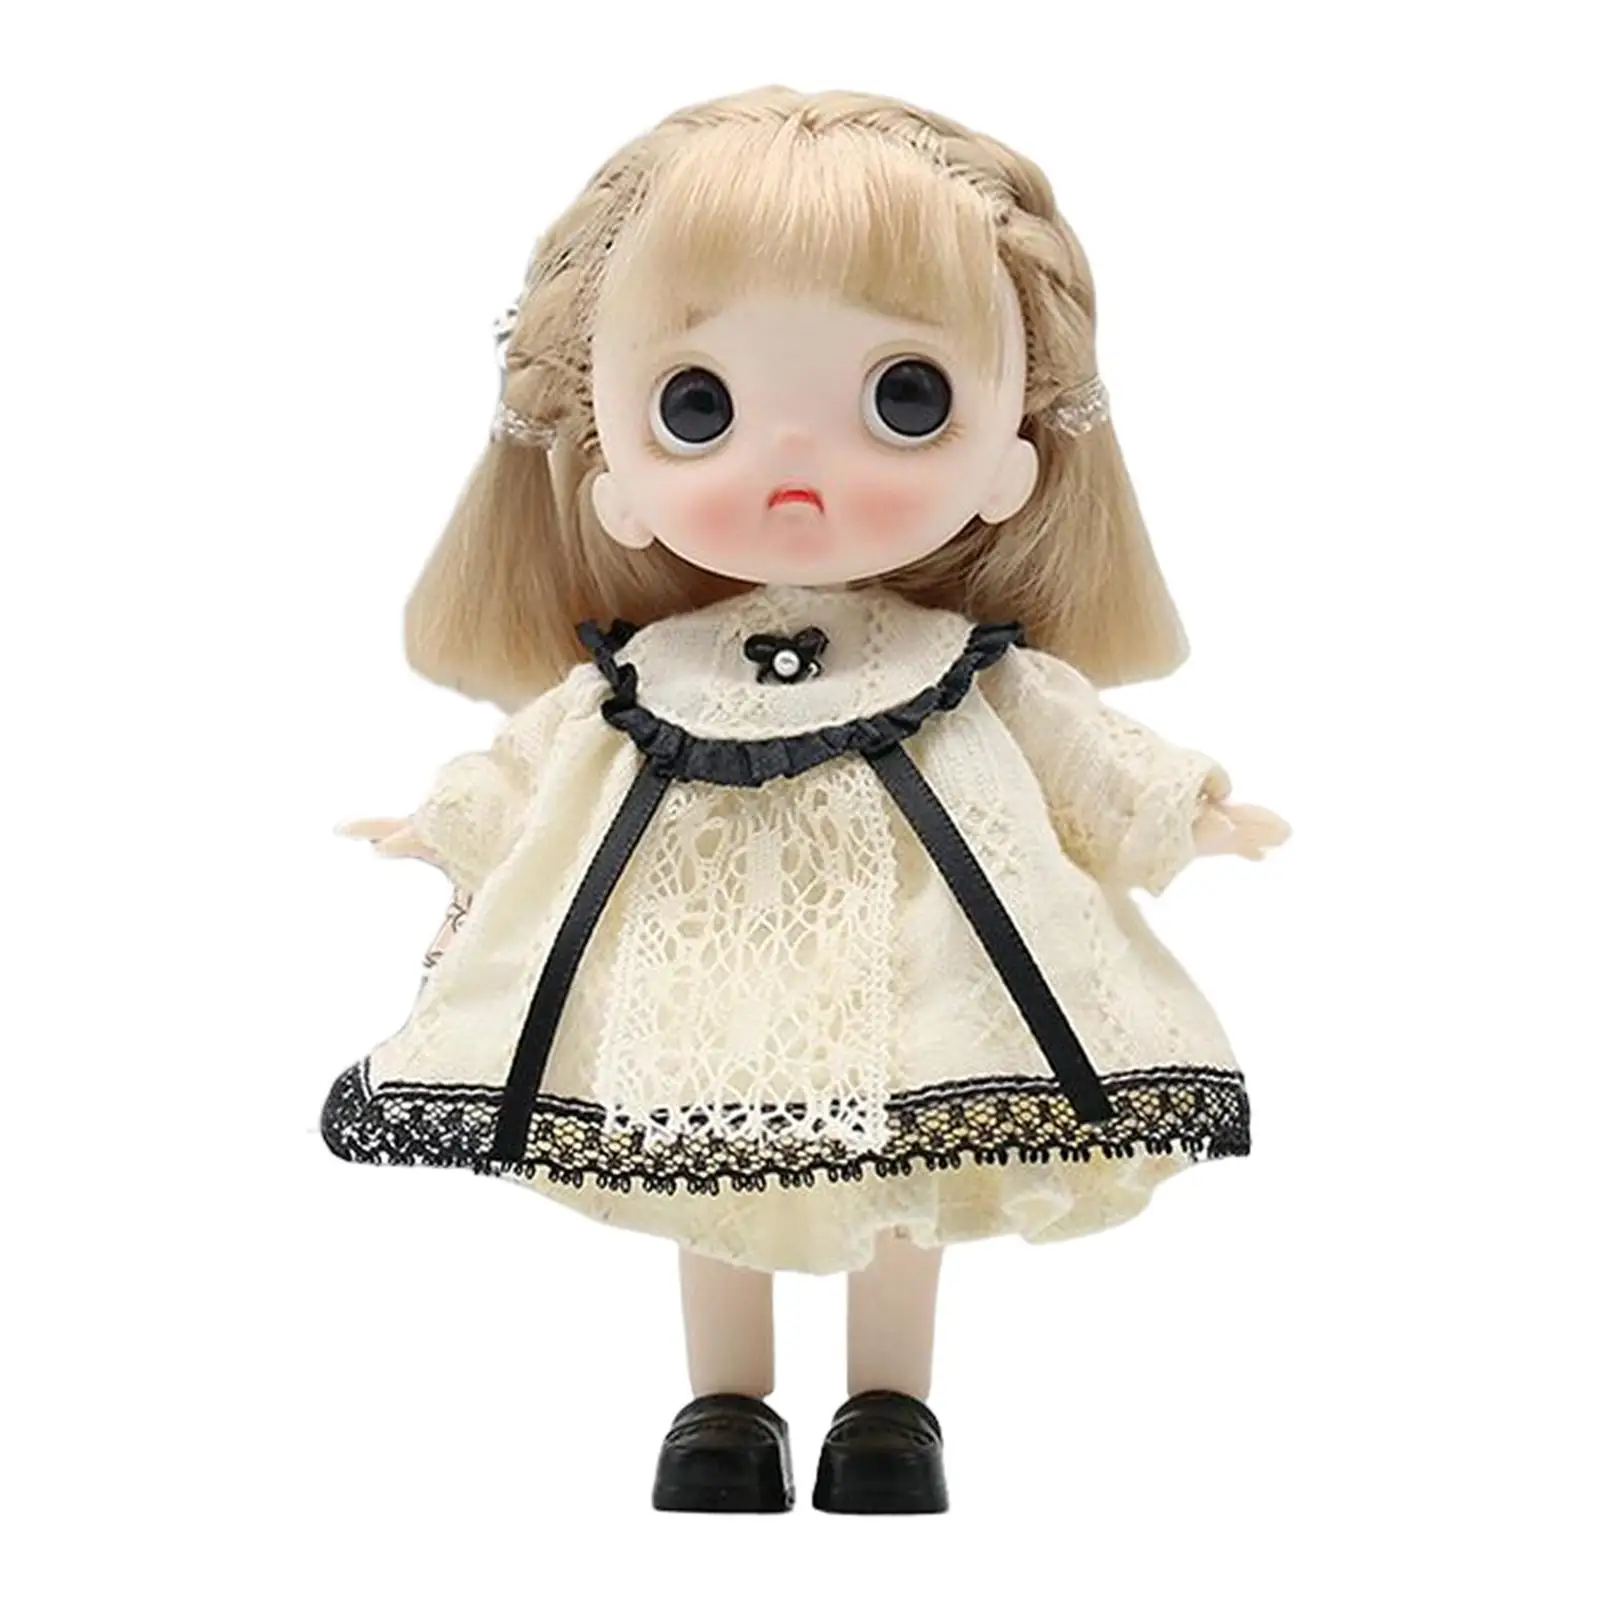 Ball Joints Doll 14cm Kids Girls Toys makeup Doll for Birthday Graduation Gifts